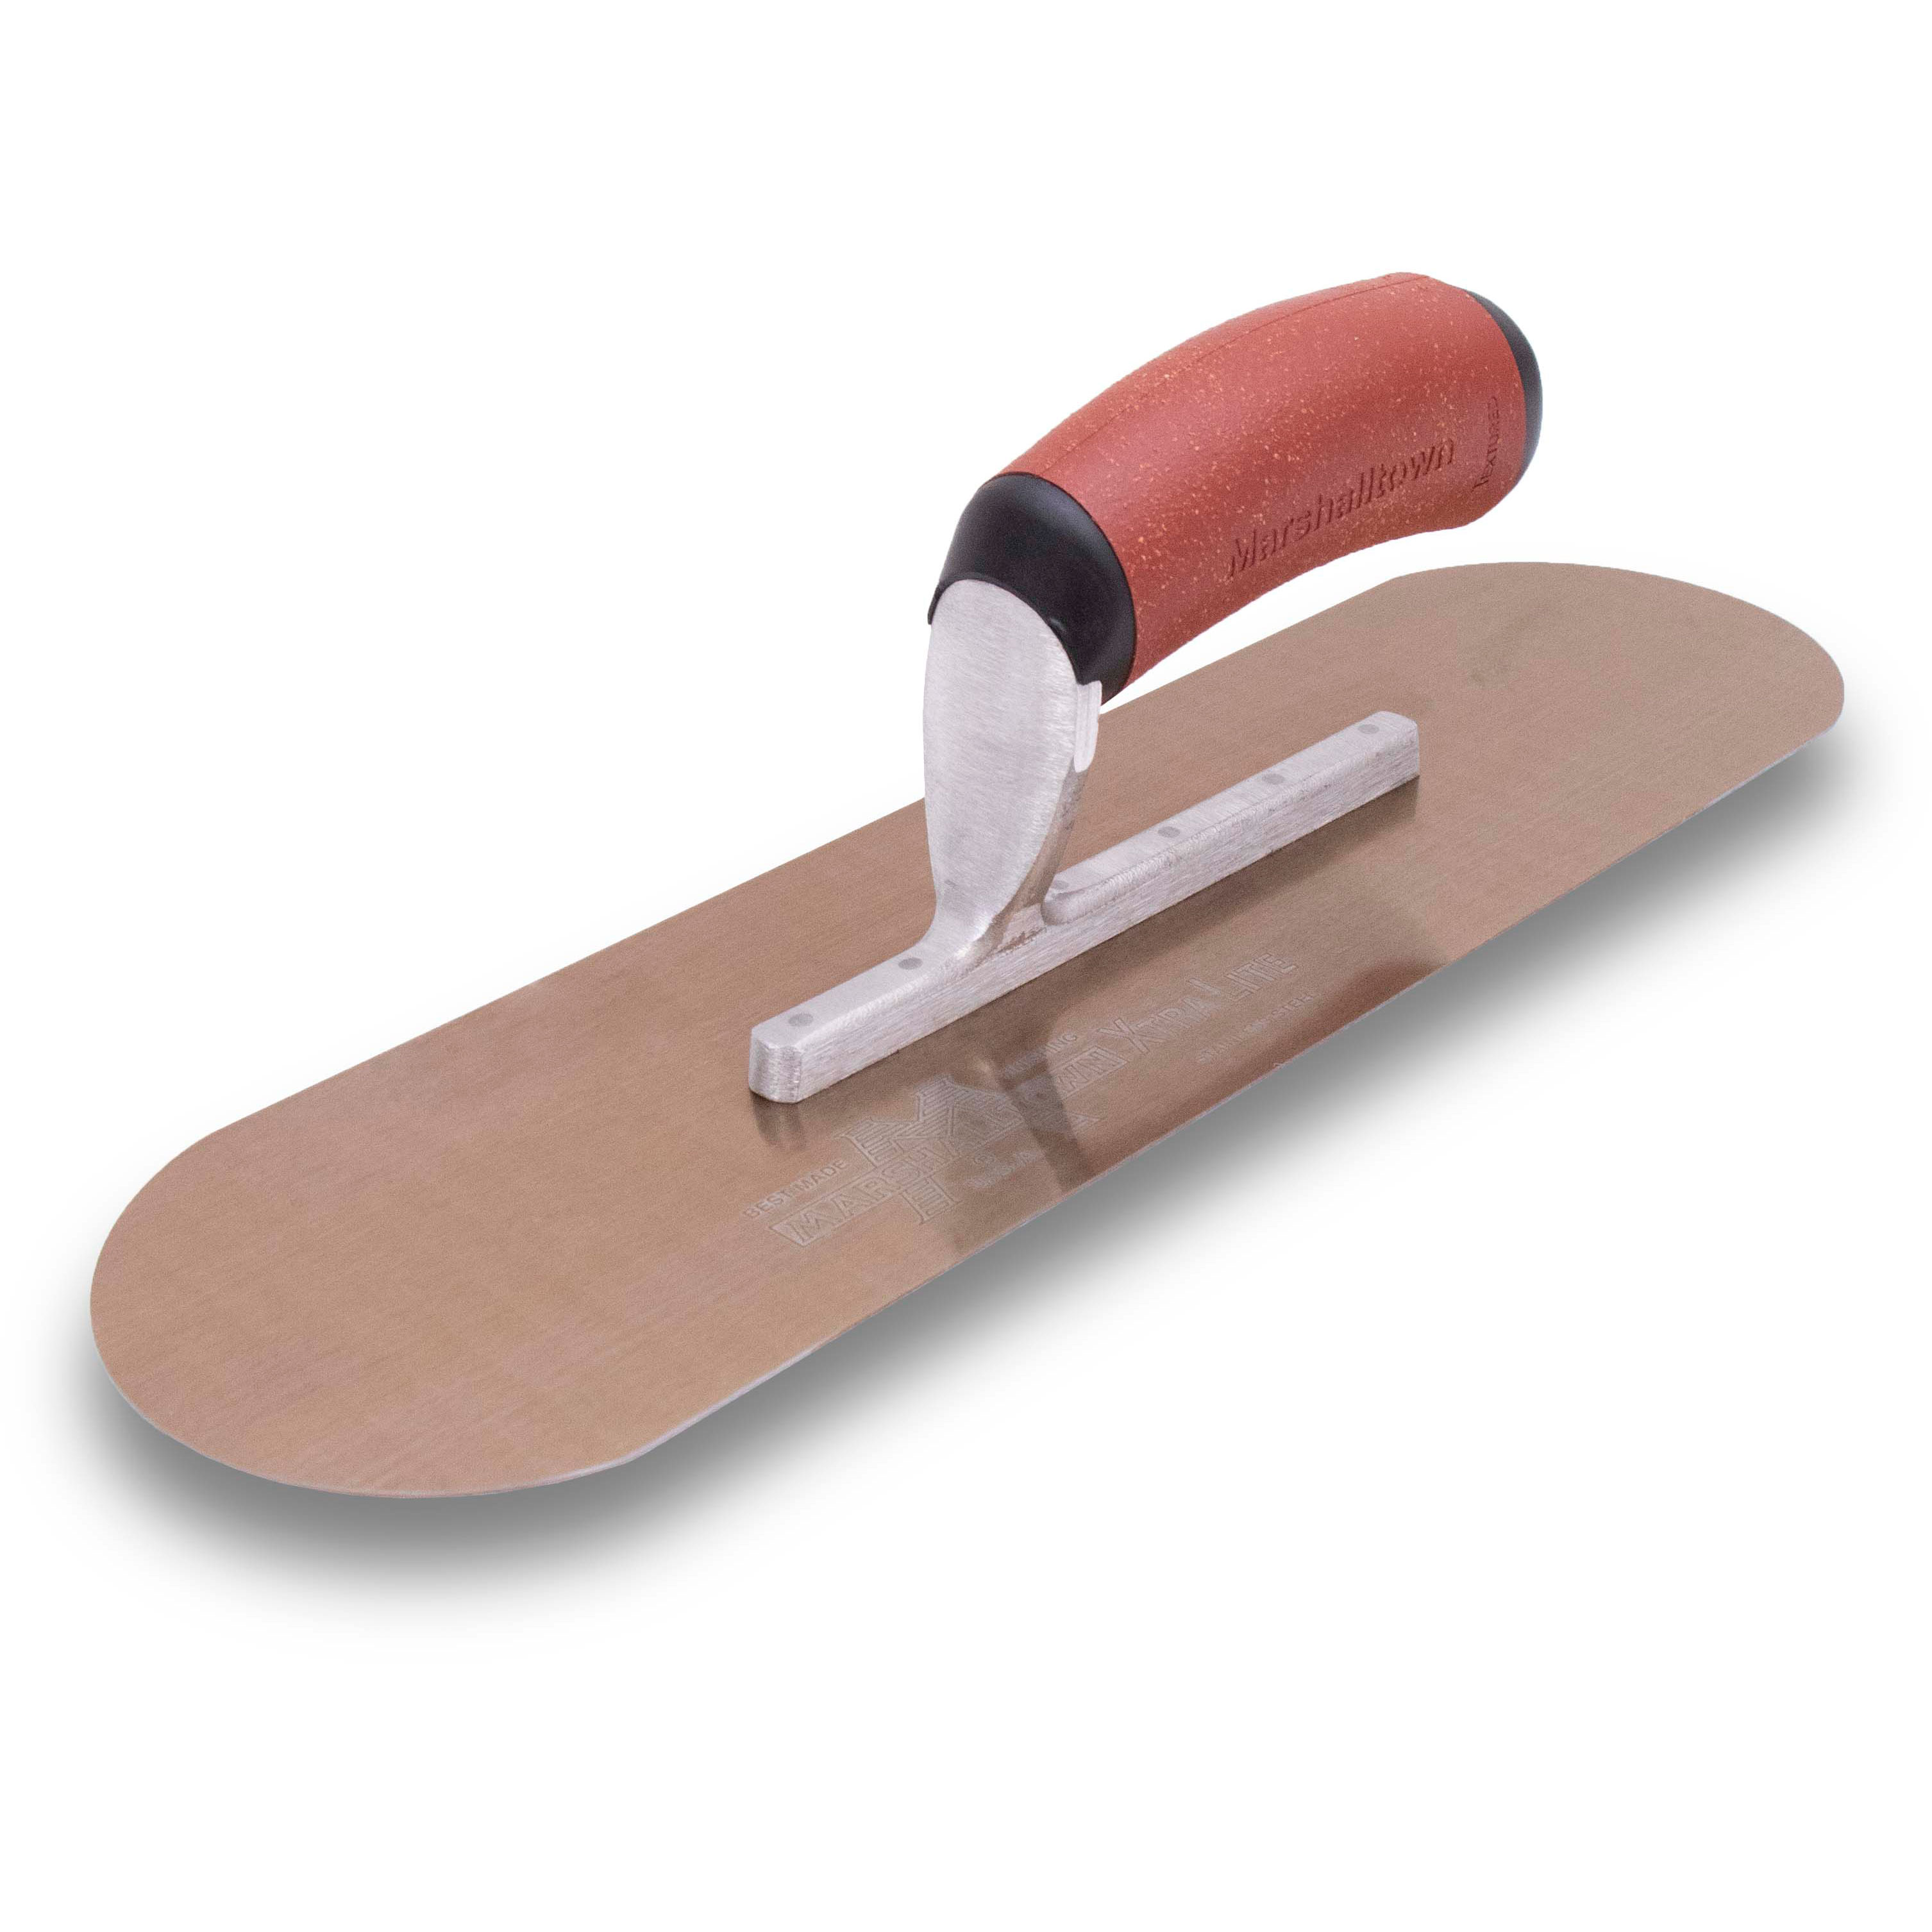 Marshalltown SP12GSDC 12in x 3-1/2in Golden Stainless Steel Pool Trowel with DuraCork Handle SP12GSDC